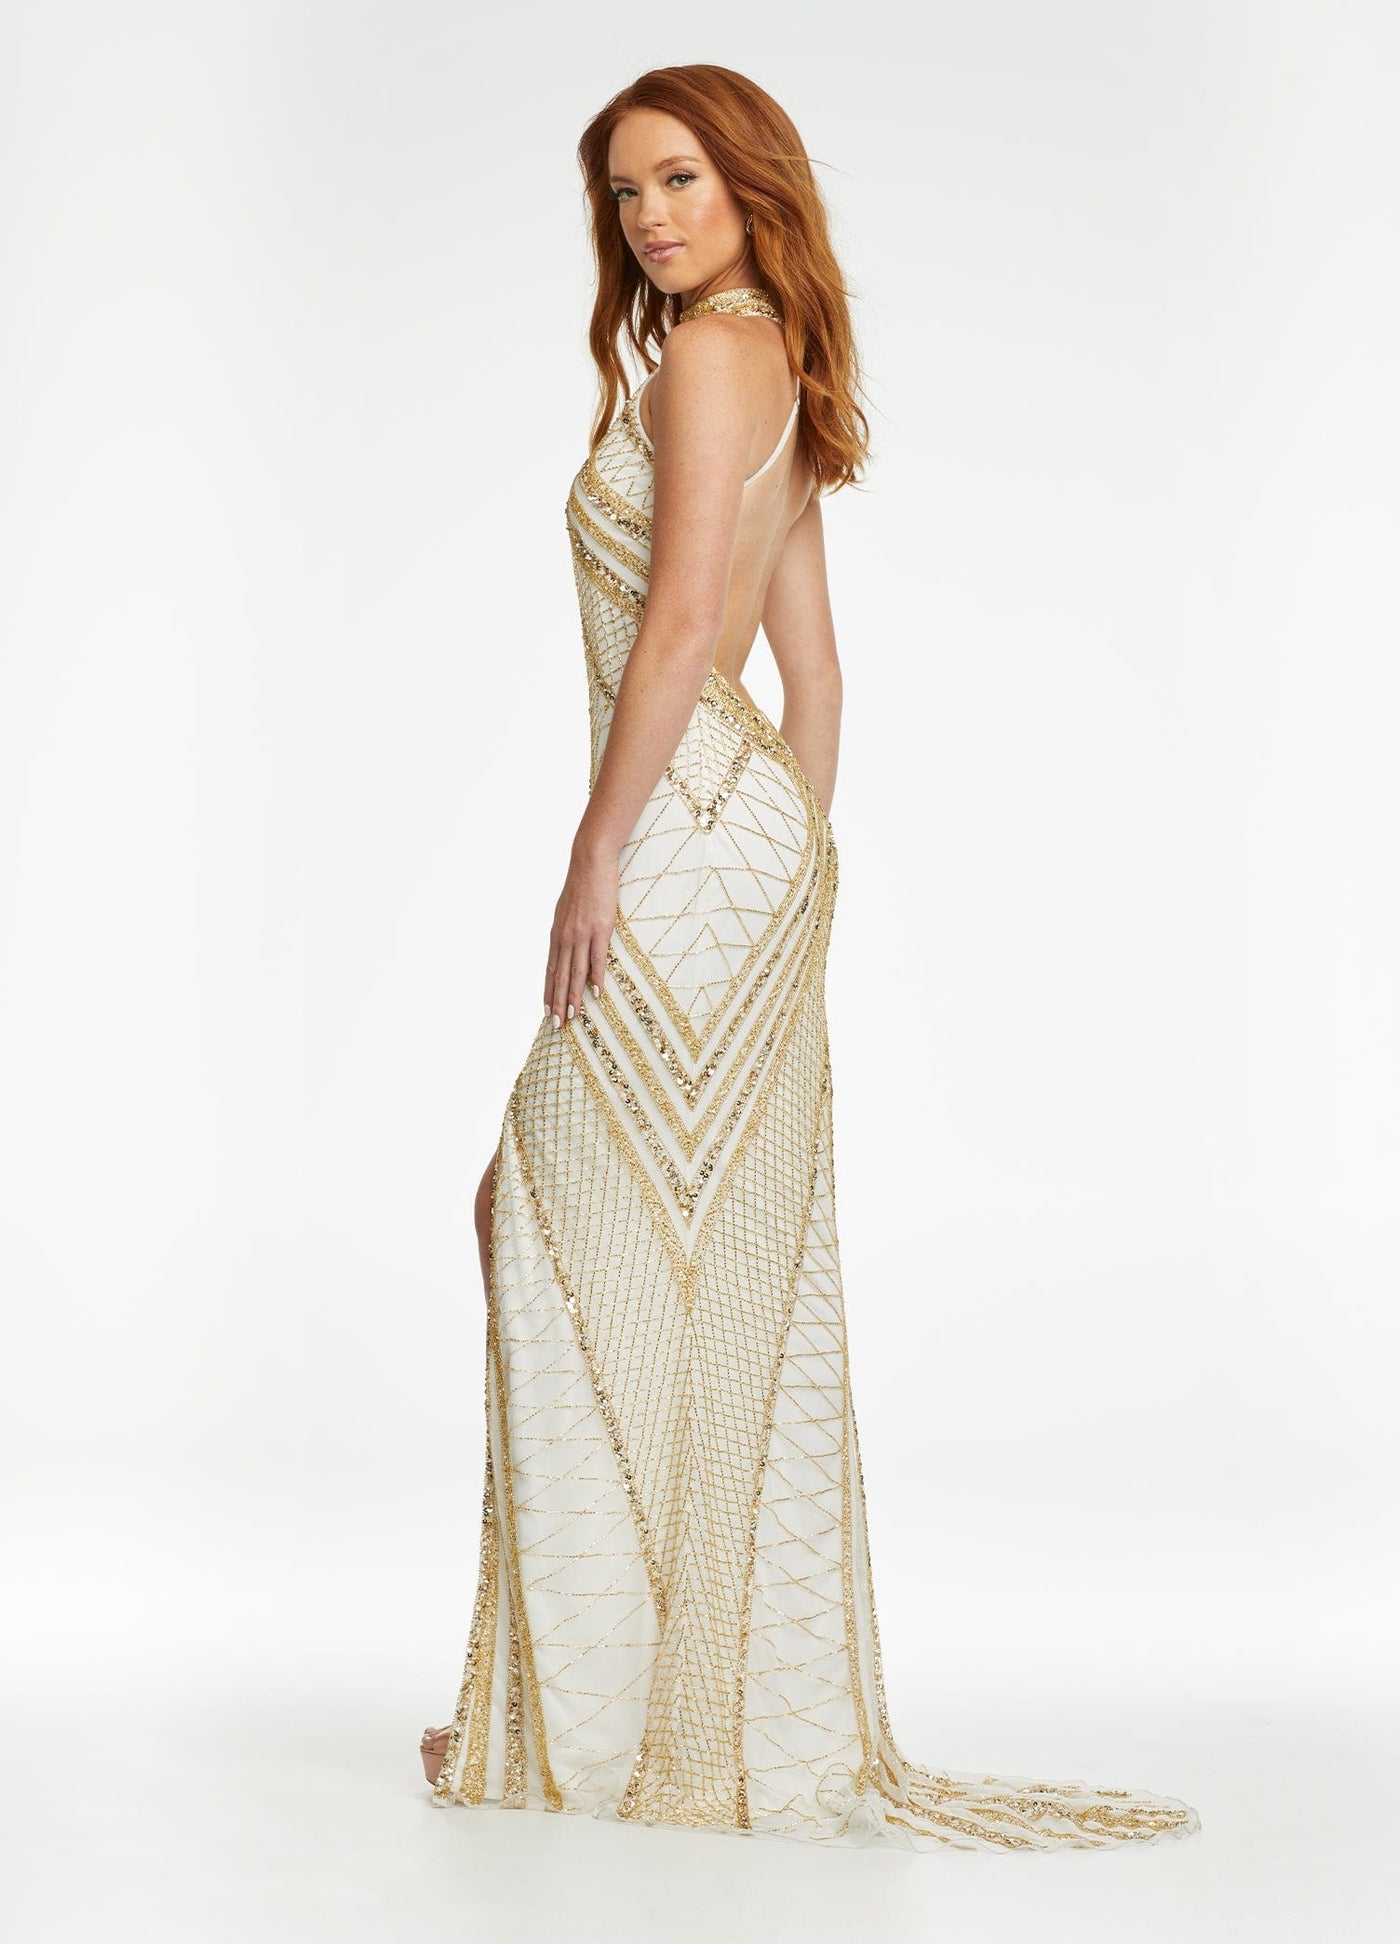 Ashley Lauren - 11177 Beaded Halter Gown with Slit In Gold and White